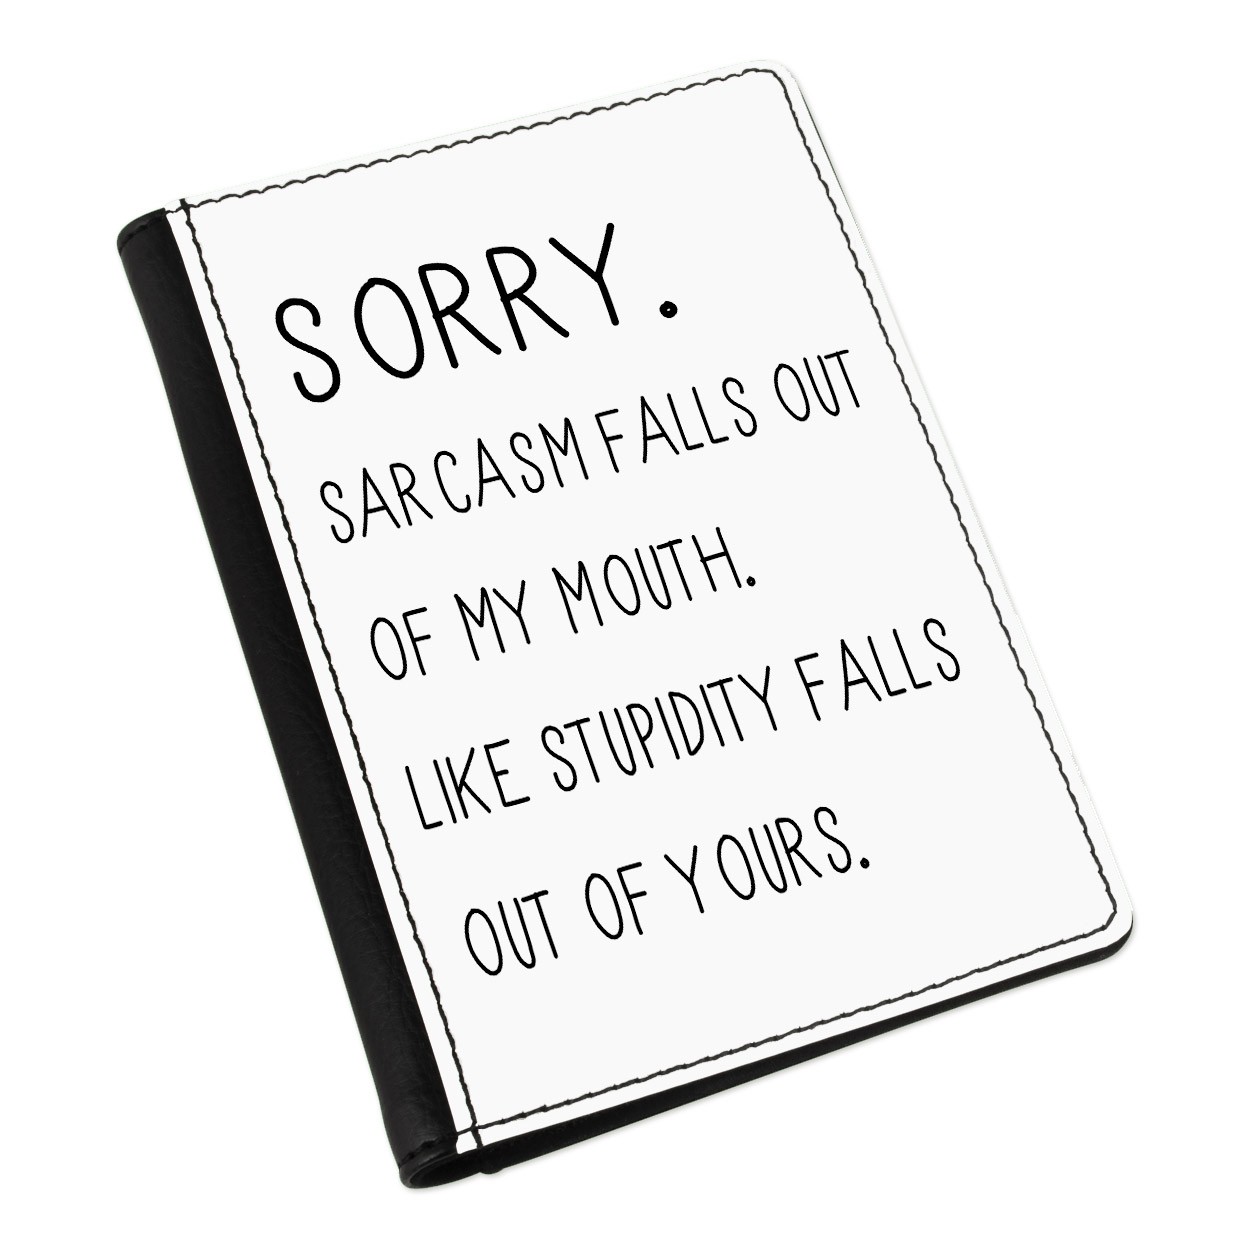 Sorry Sarcasm Falls Out Of My Mouth Passport Holder Cover